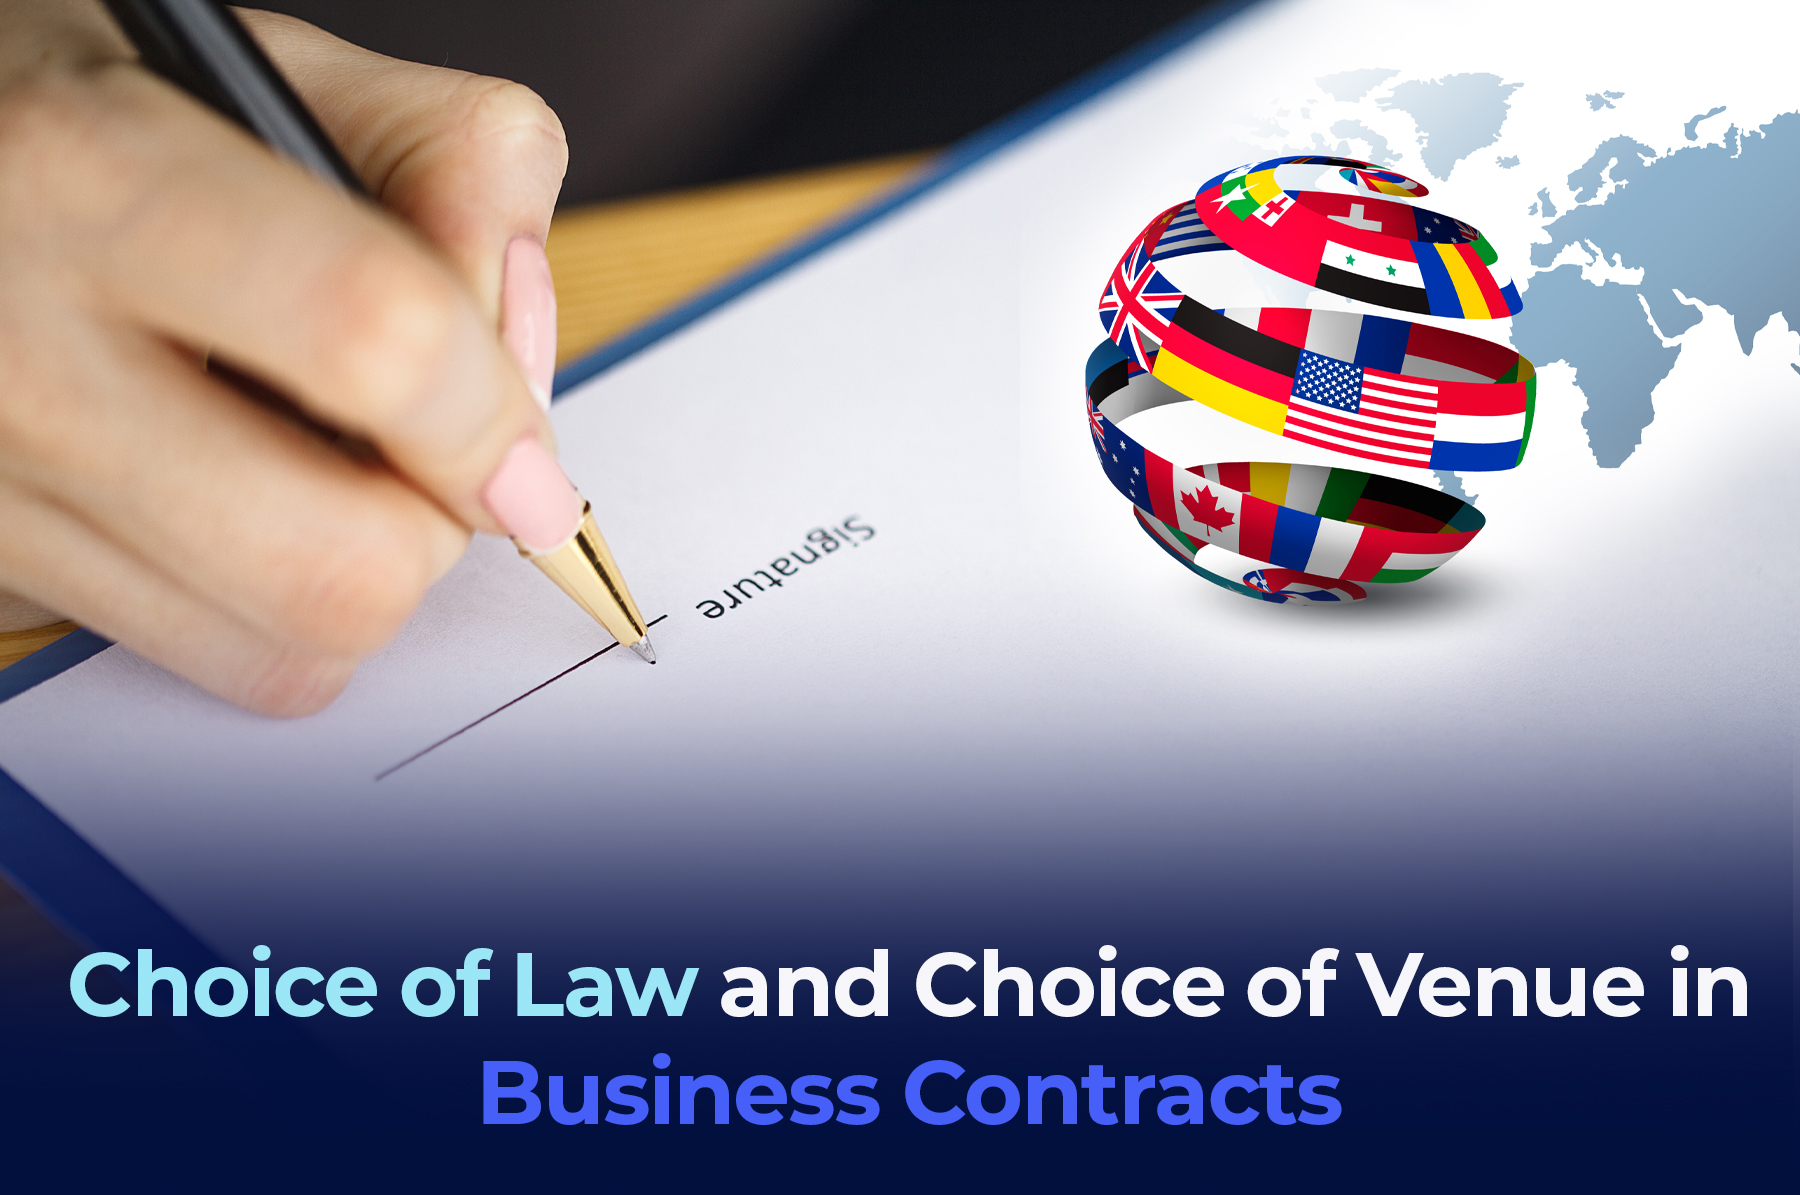 Choice Of Law And Venue In Business Contracts South Florida Law PLLC